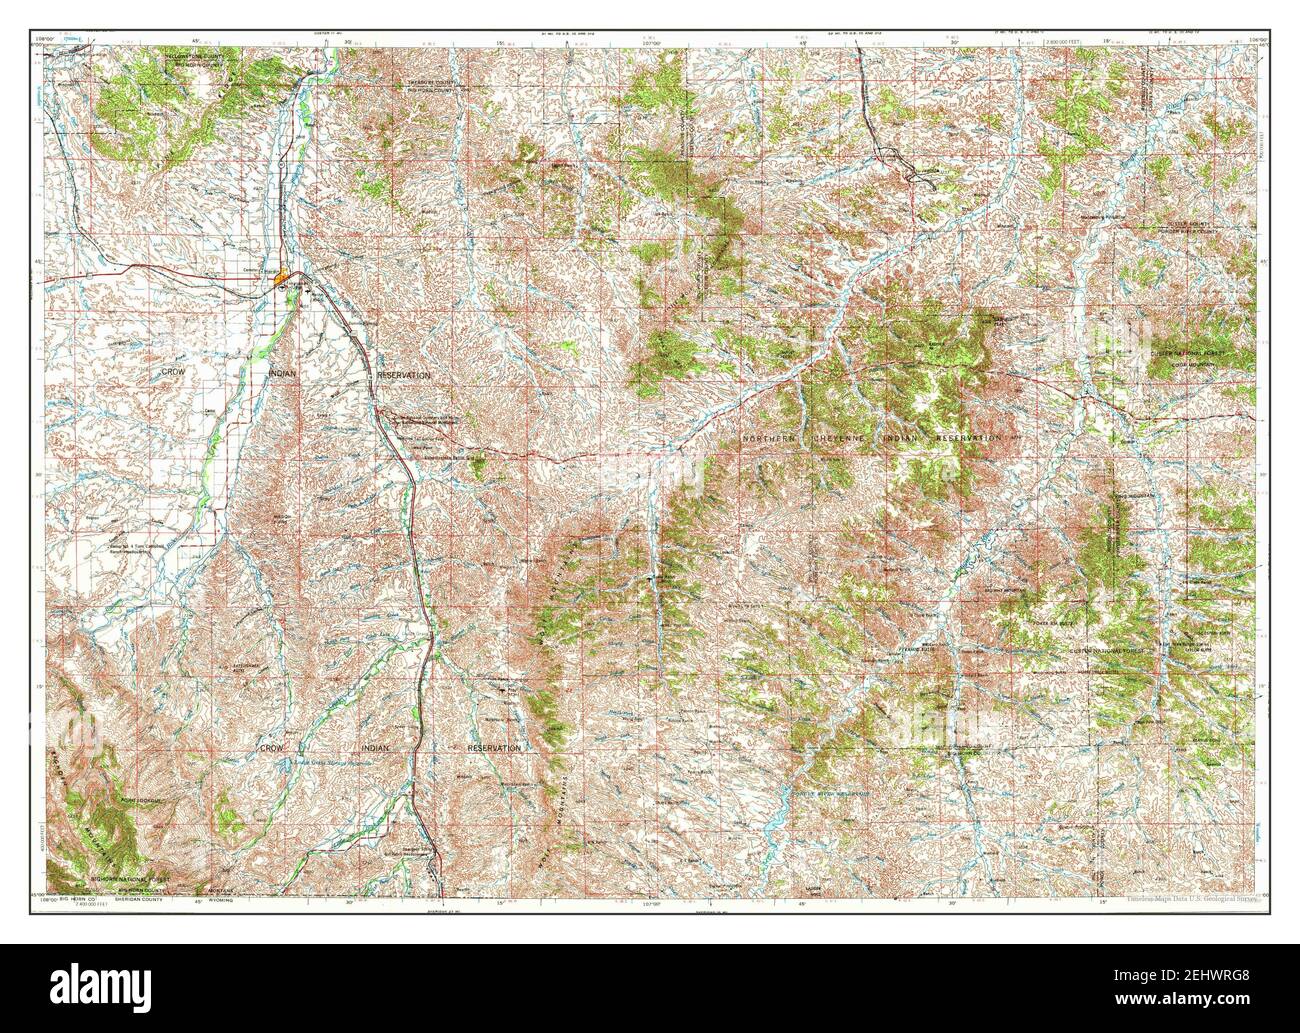 Hardin Montana Map 1954 1250000 United States Of America By Timeless Maps Data Us Geological Survey 2EHWRG8 